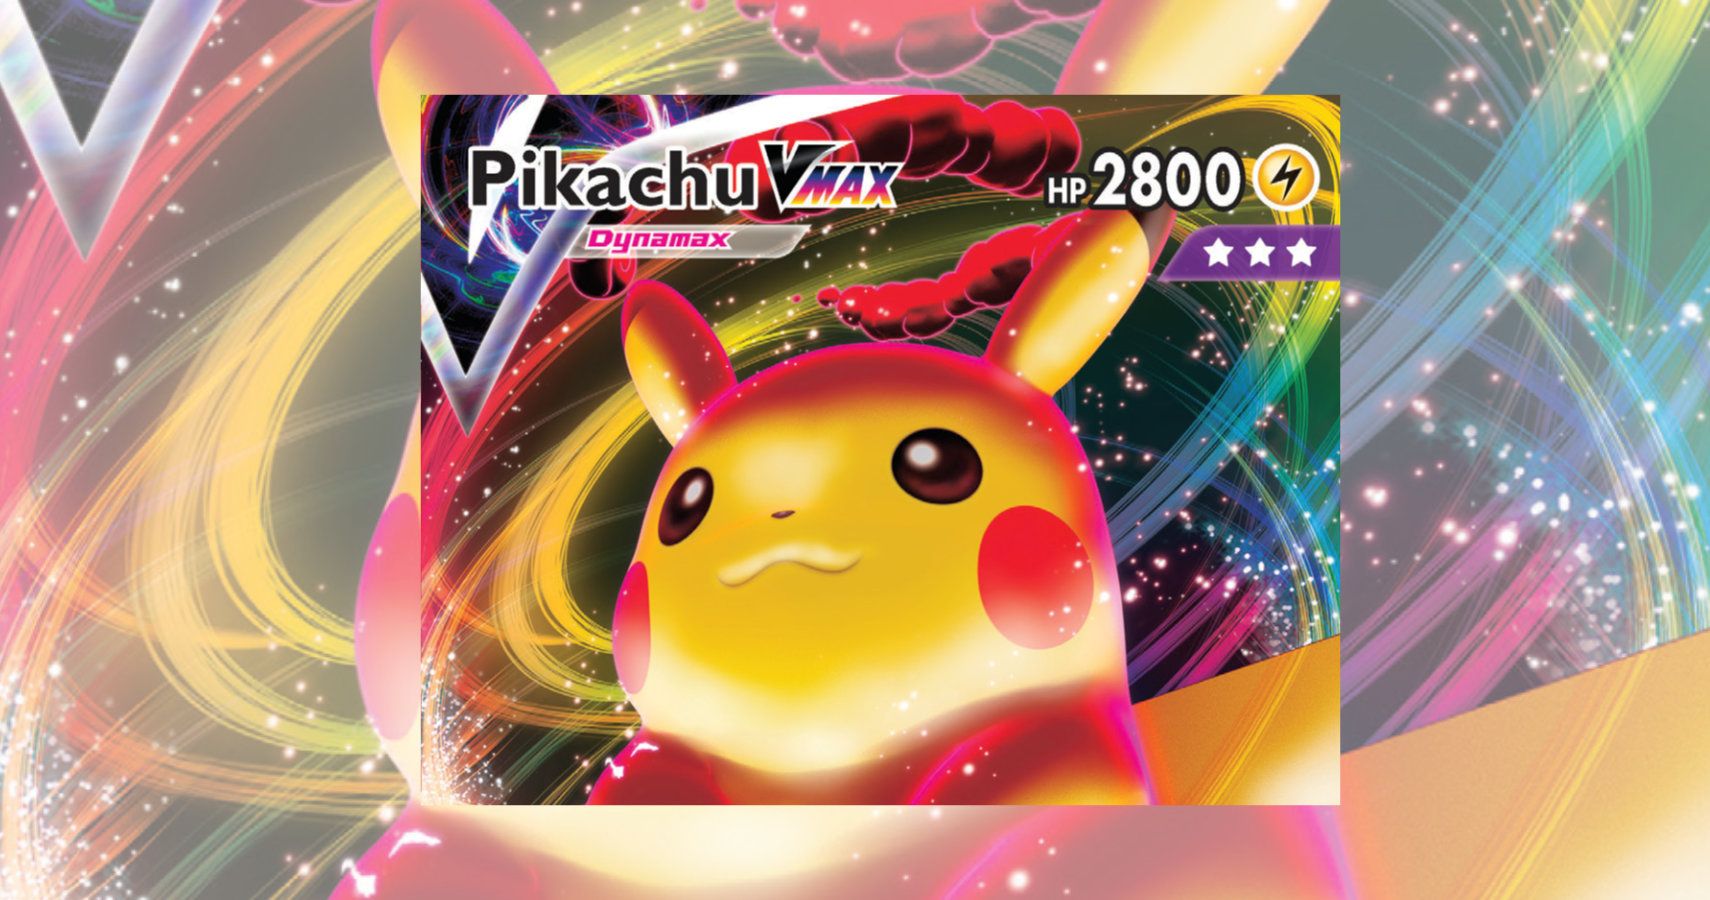 Pokémon Trading Card Game Live Release Date Pokemon Trading Card Game Introduces Raid Battle Mode